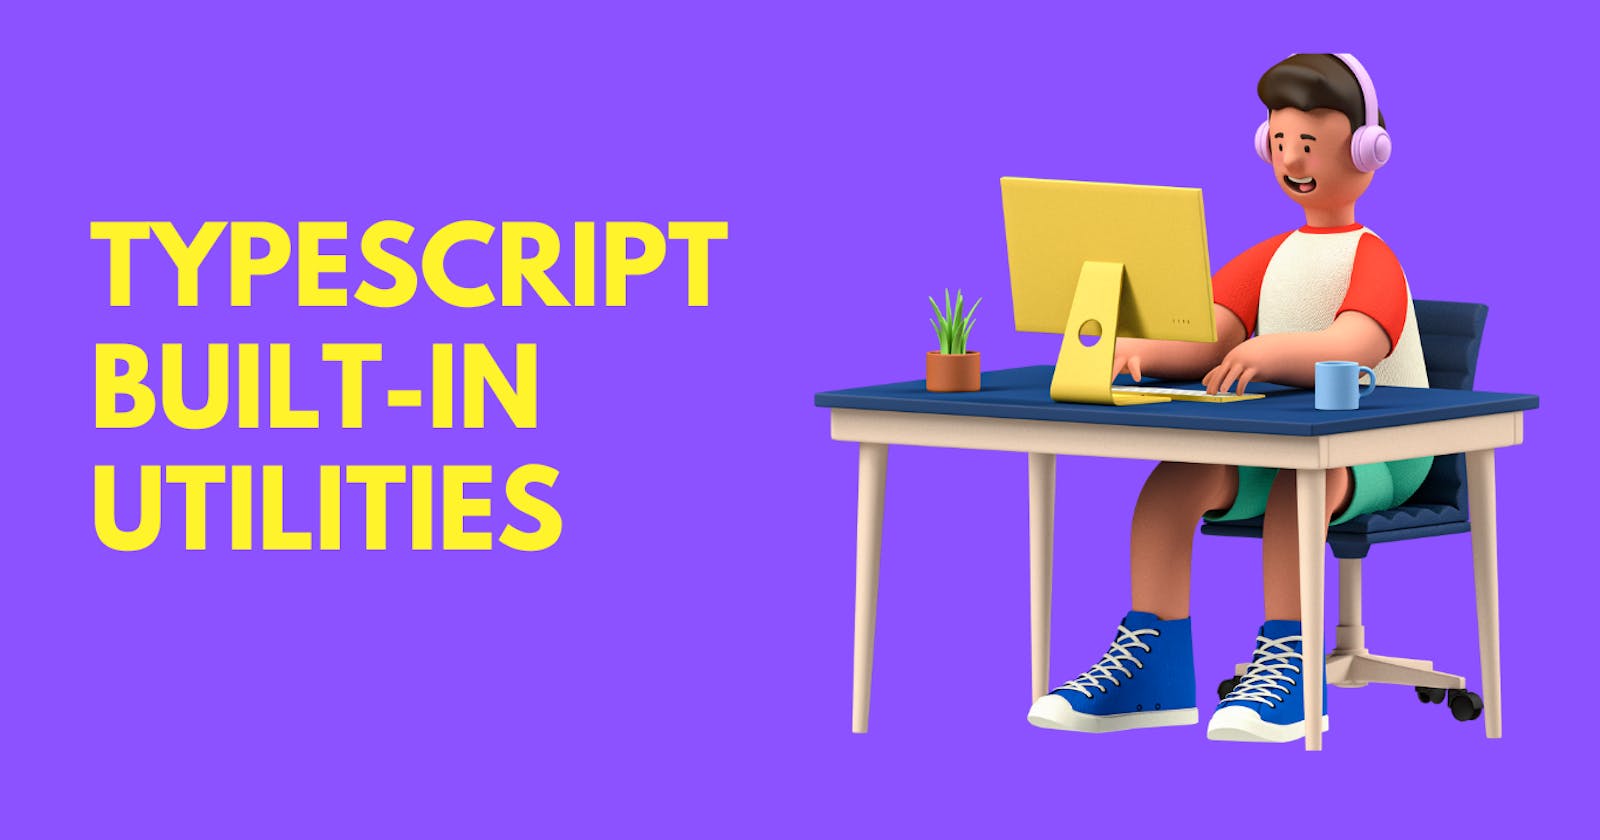 TypeScript's built-in utilities: the key to writing maintainable test code